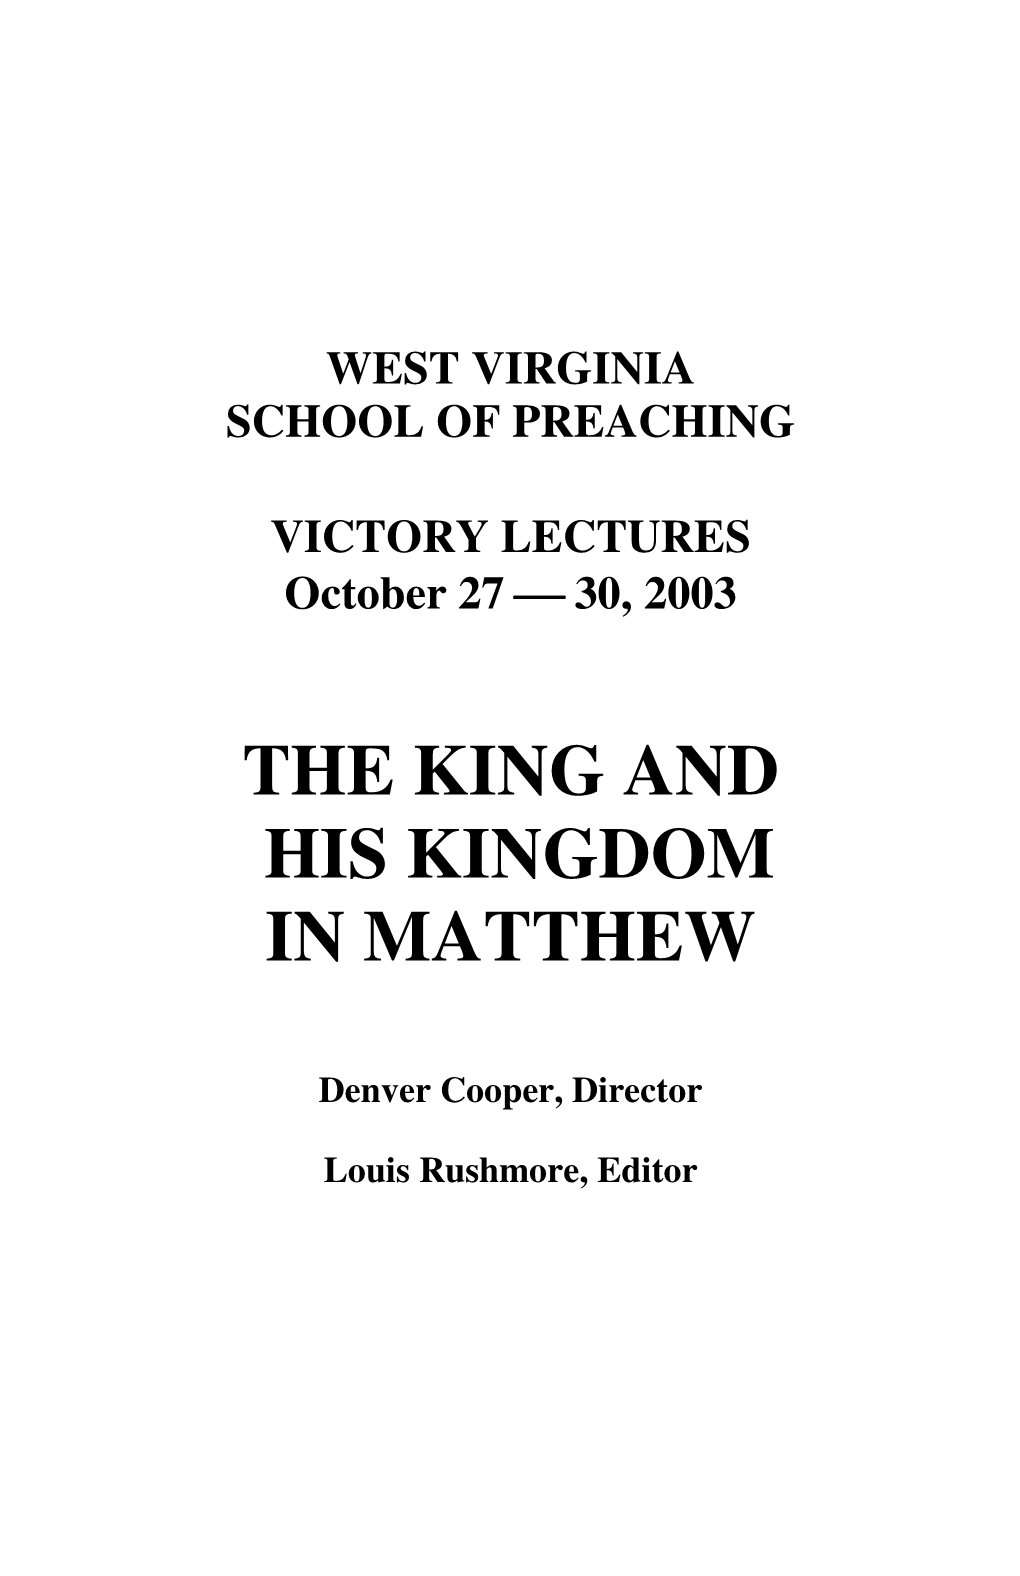 The King and His Kingdom in Matthew